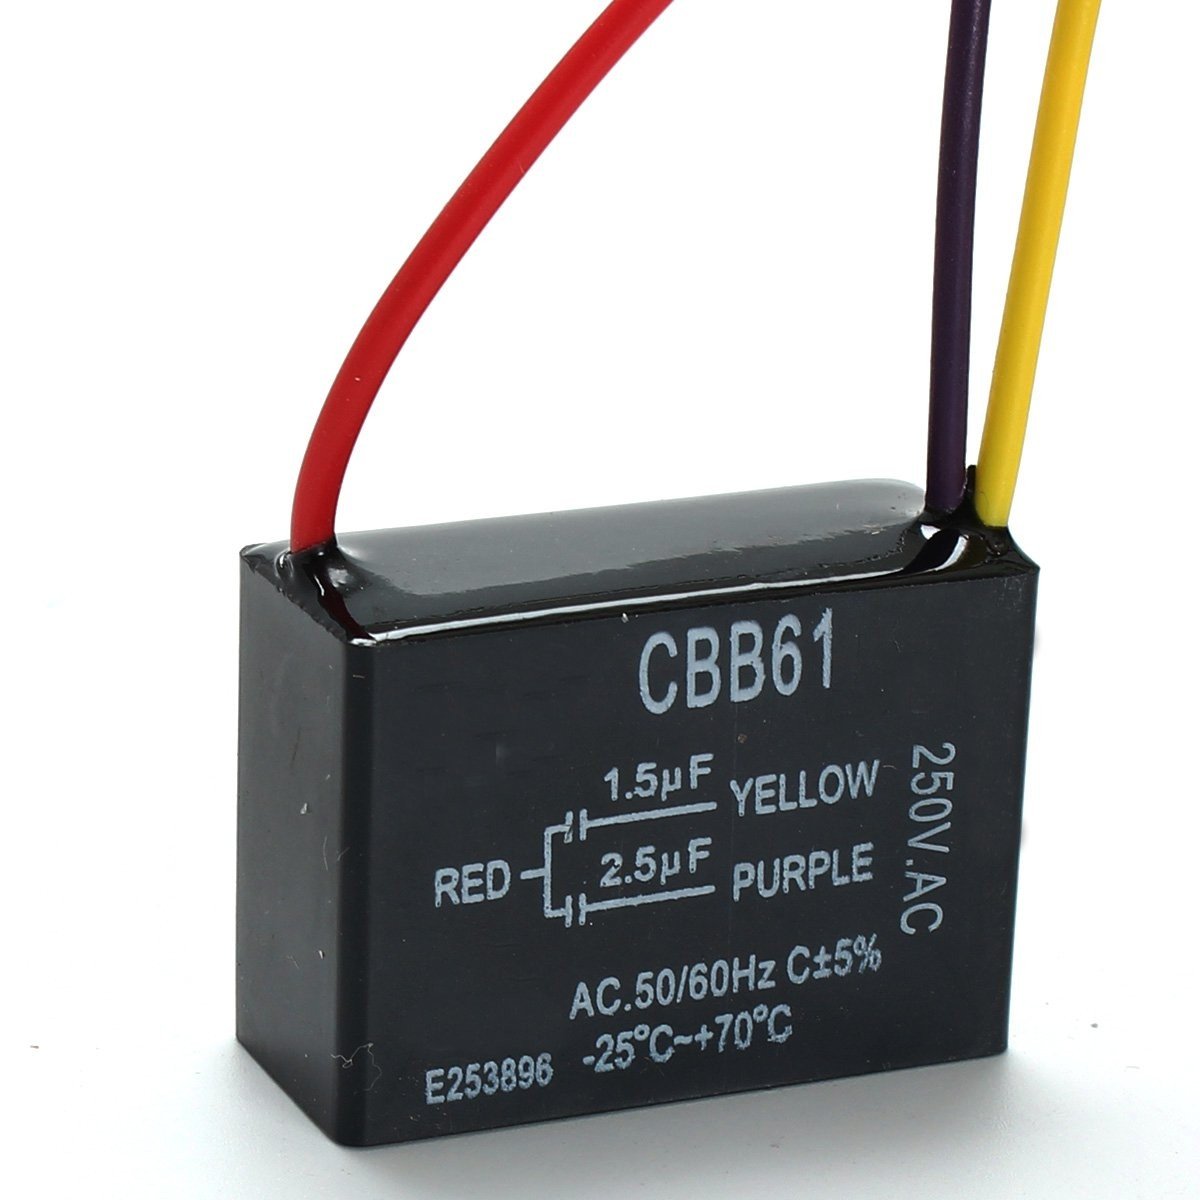 CBB61 1.5uF+2.5uF 3 WIRE 250VAC Ceiling Fan Capacitor 3 Wires 2